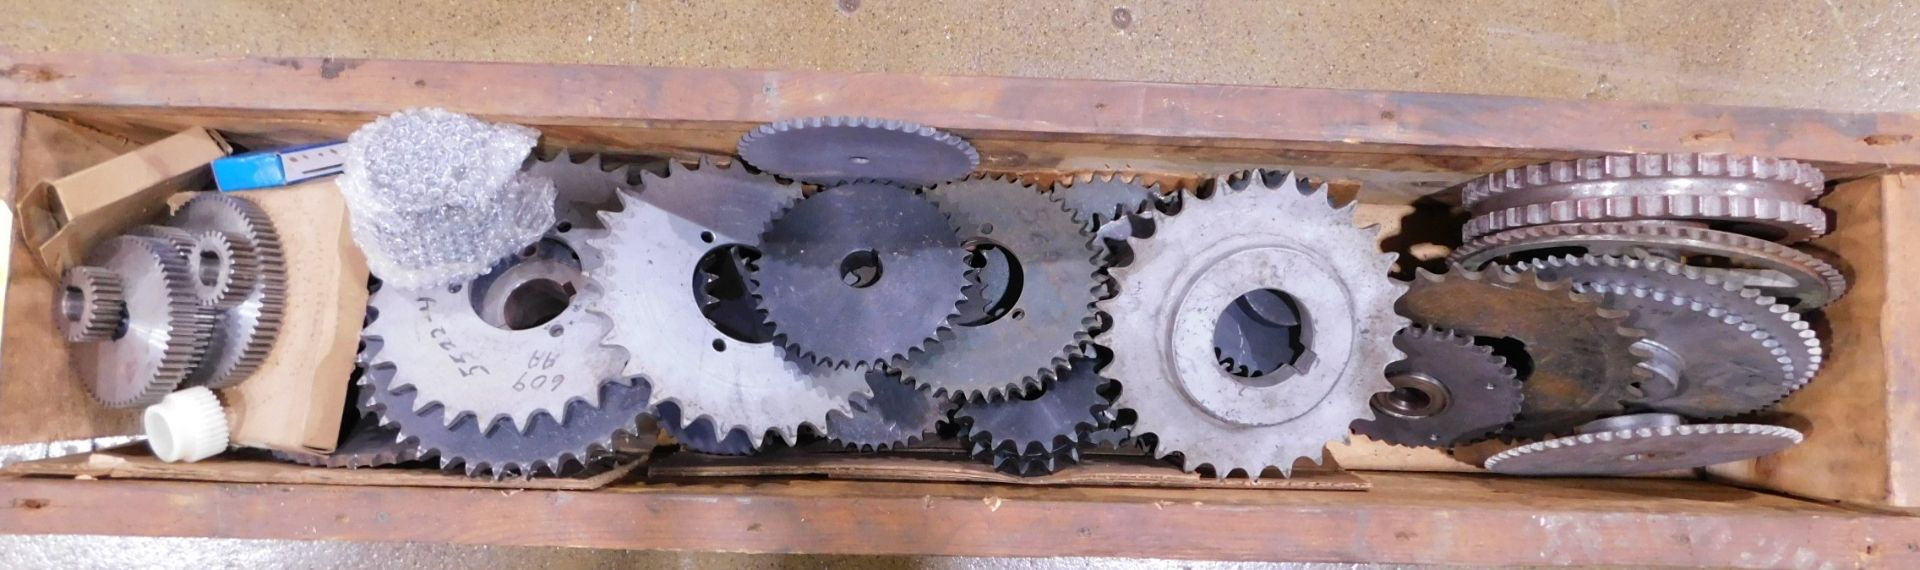 Miscellaneous Sprockets